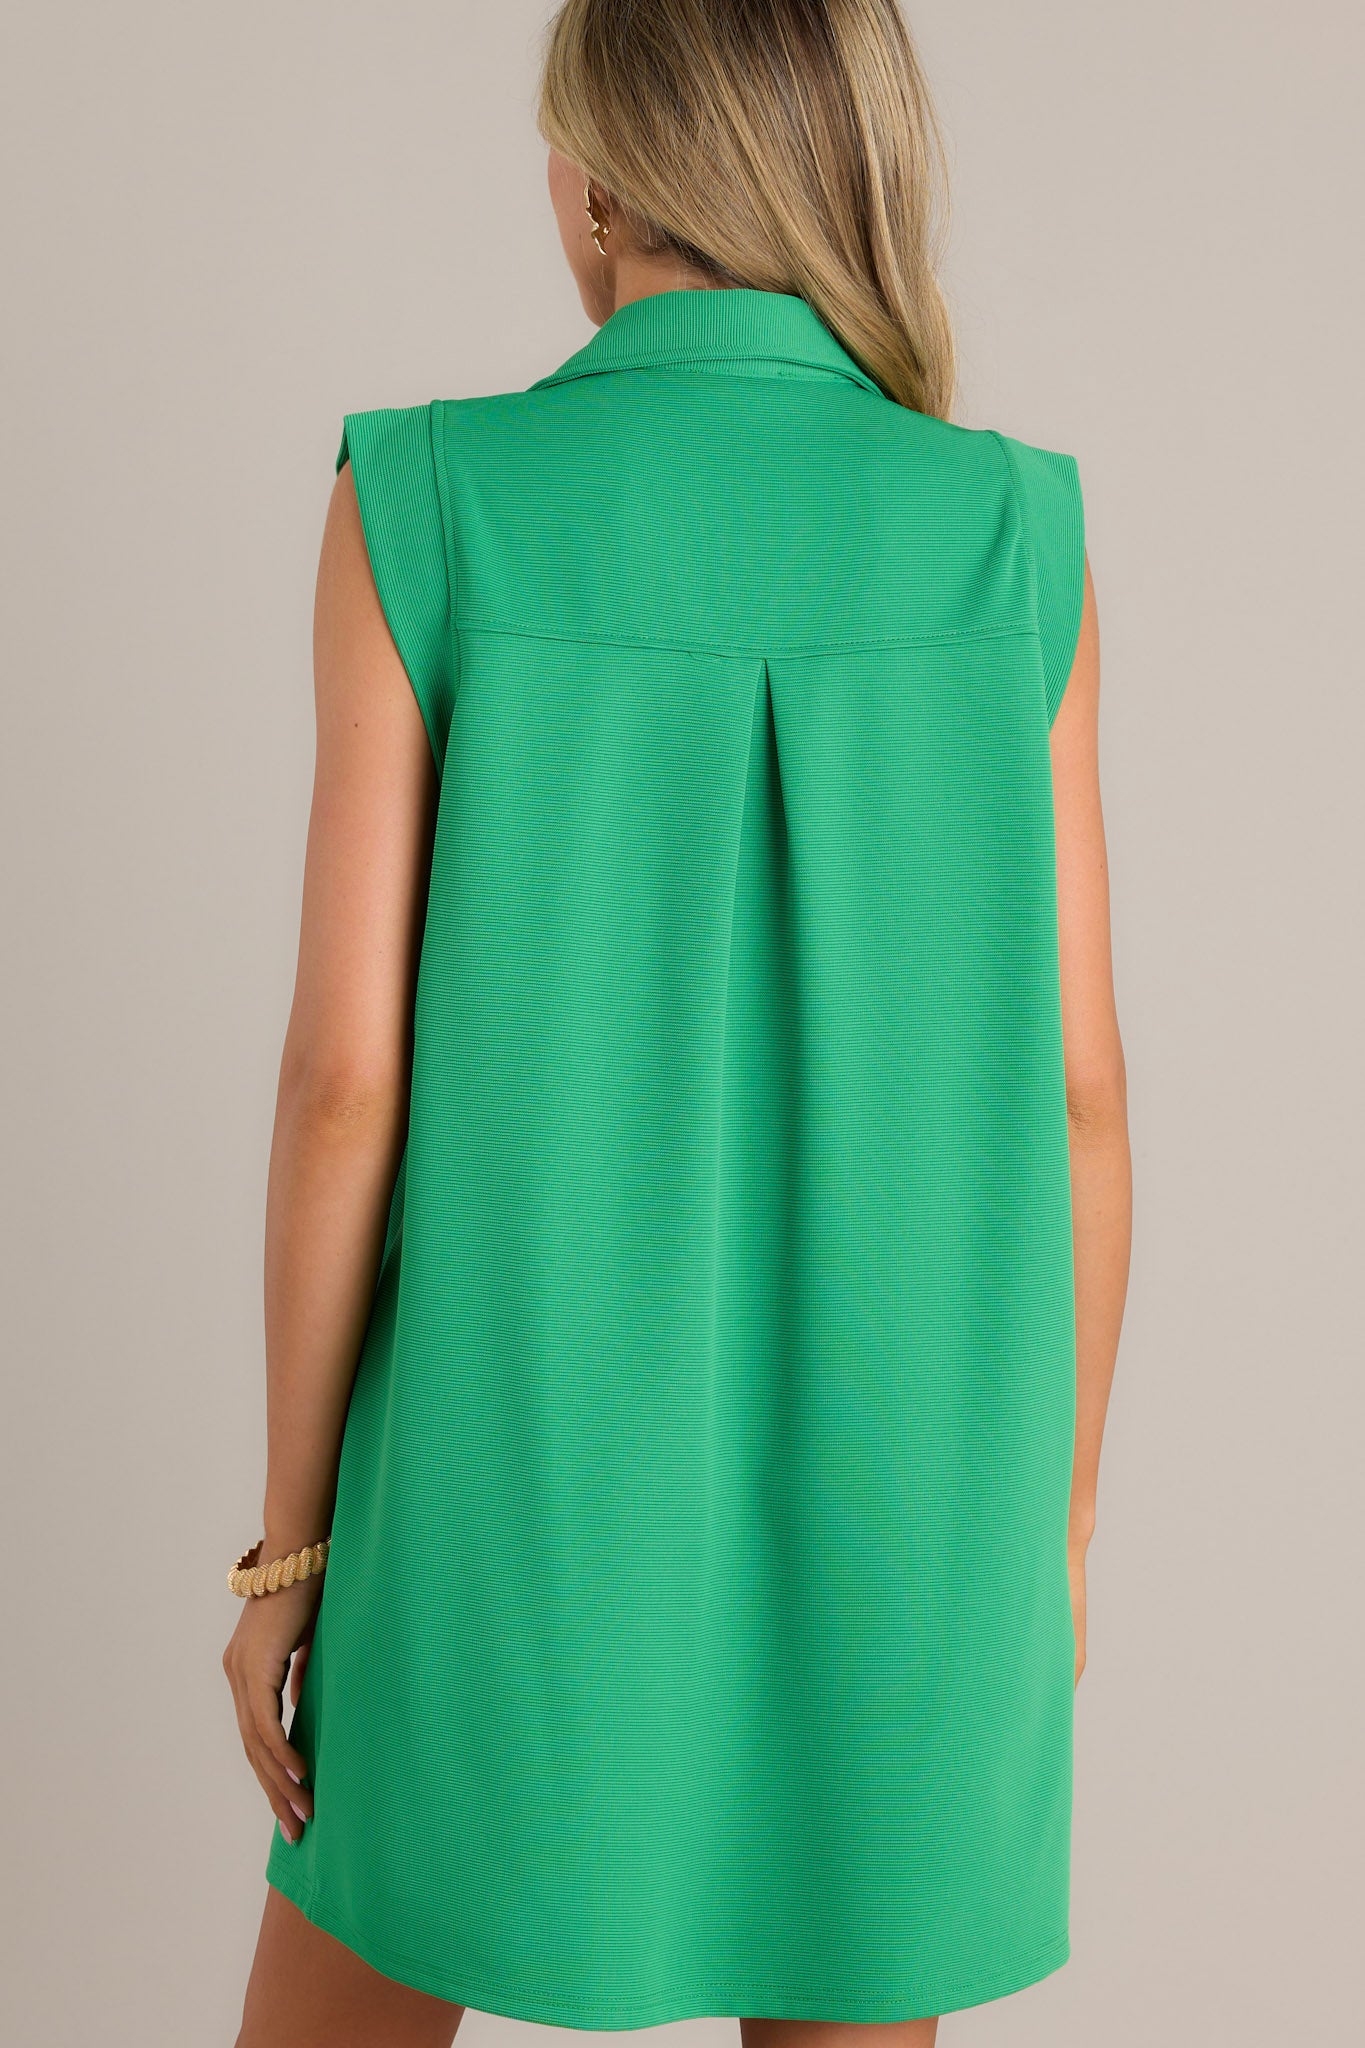 Back view of a sleeveless green shift dress with a simple, clean design, highlighting the collared neckline.